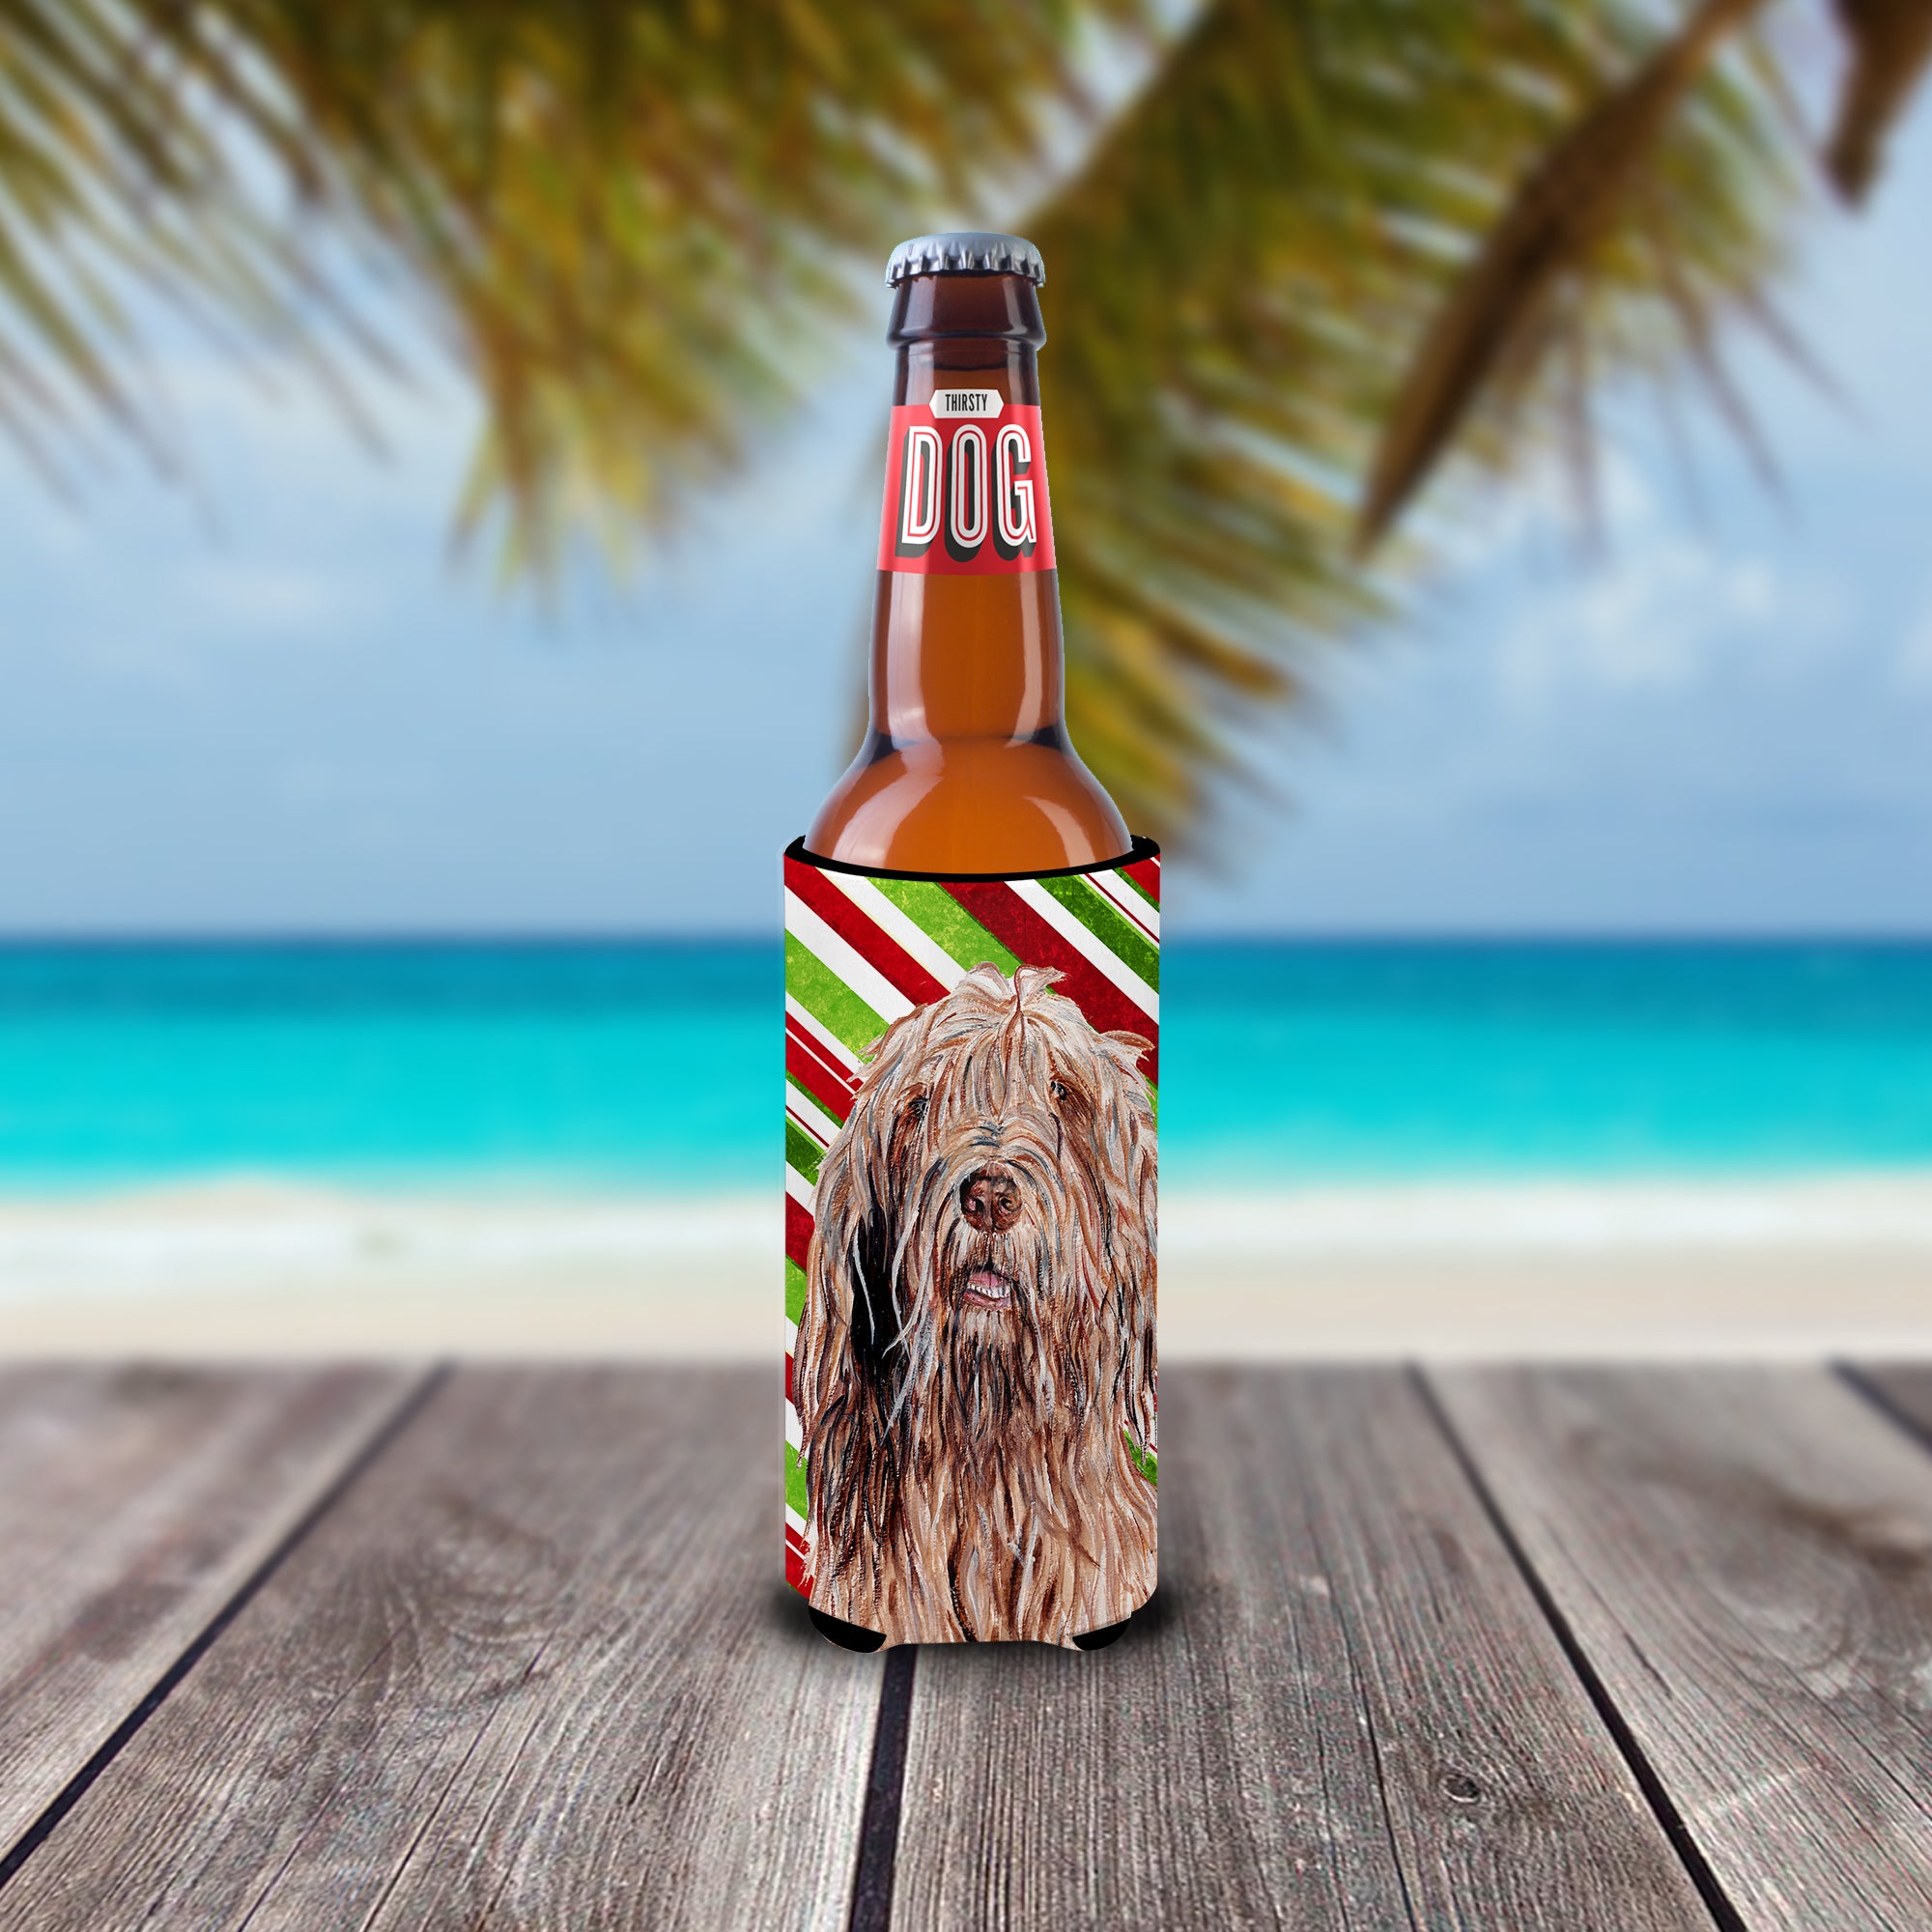 Otterhound Candy Cane Christmas Ultra Beverage Insulators for slim cans SC9805MUK.